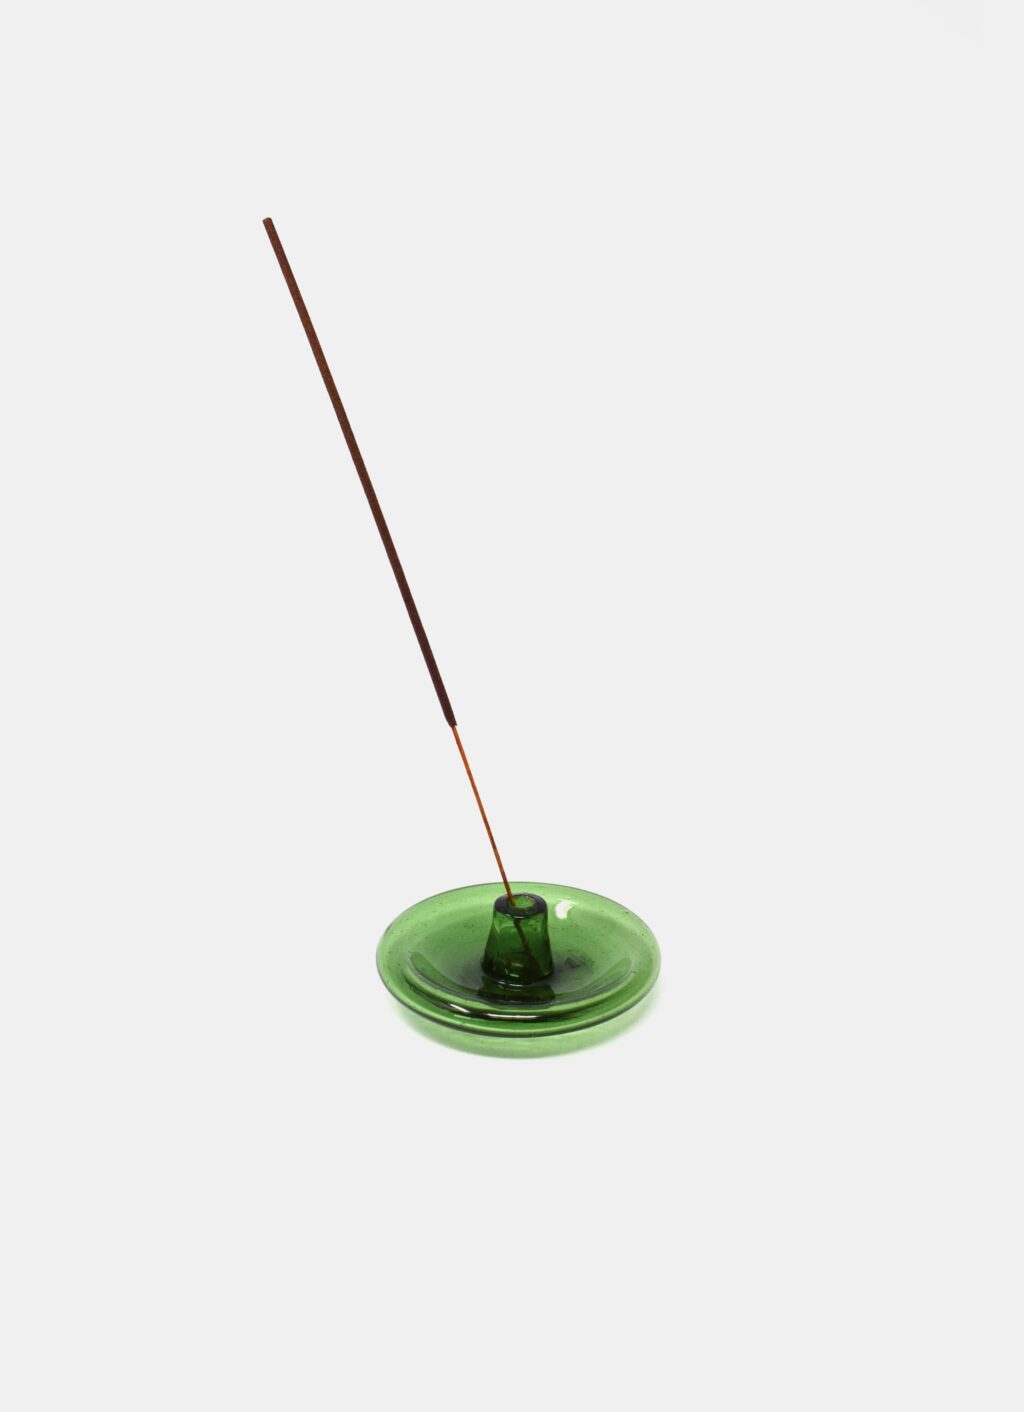 La Soufflerie - Handblown Incense Holder - Recycled Glass - Olive